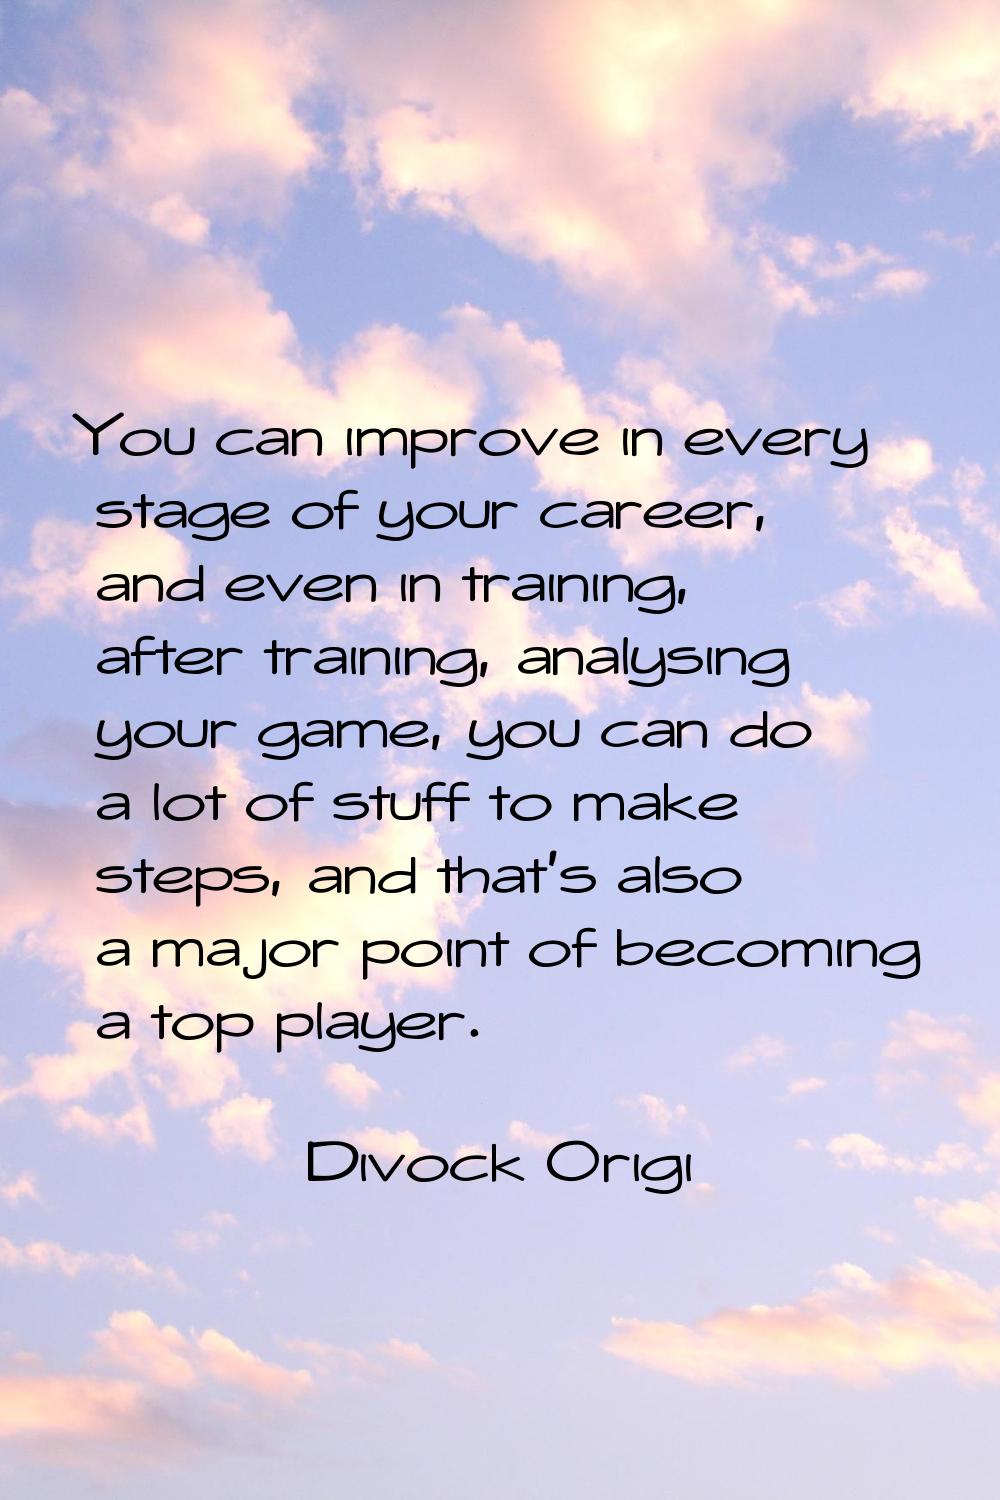 You can improve in every stage of your career, and even in training, after training, analysing your